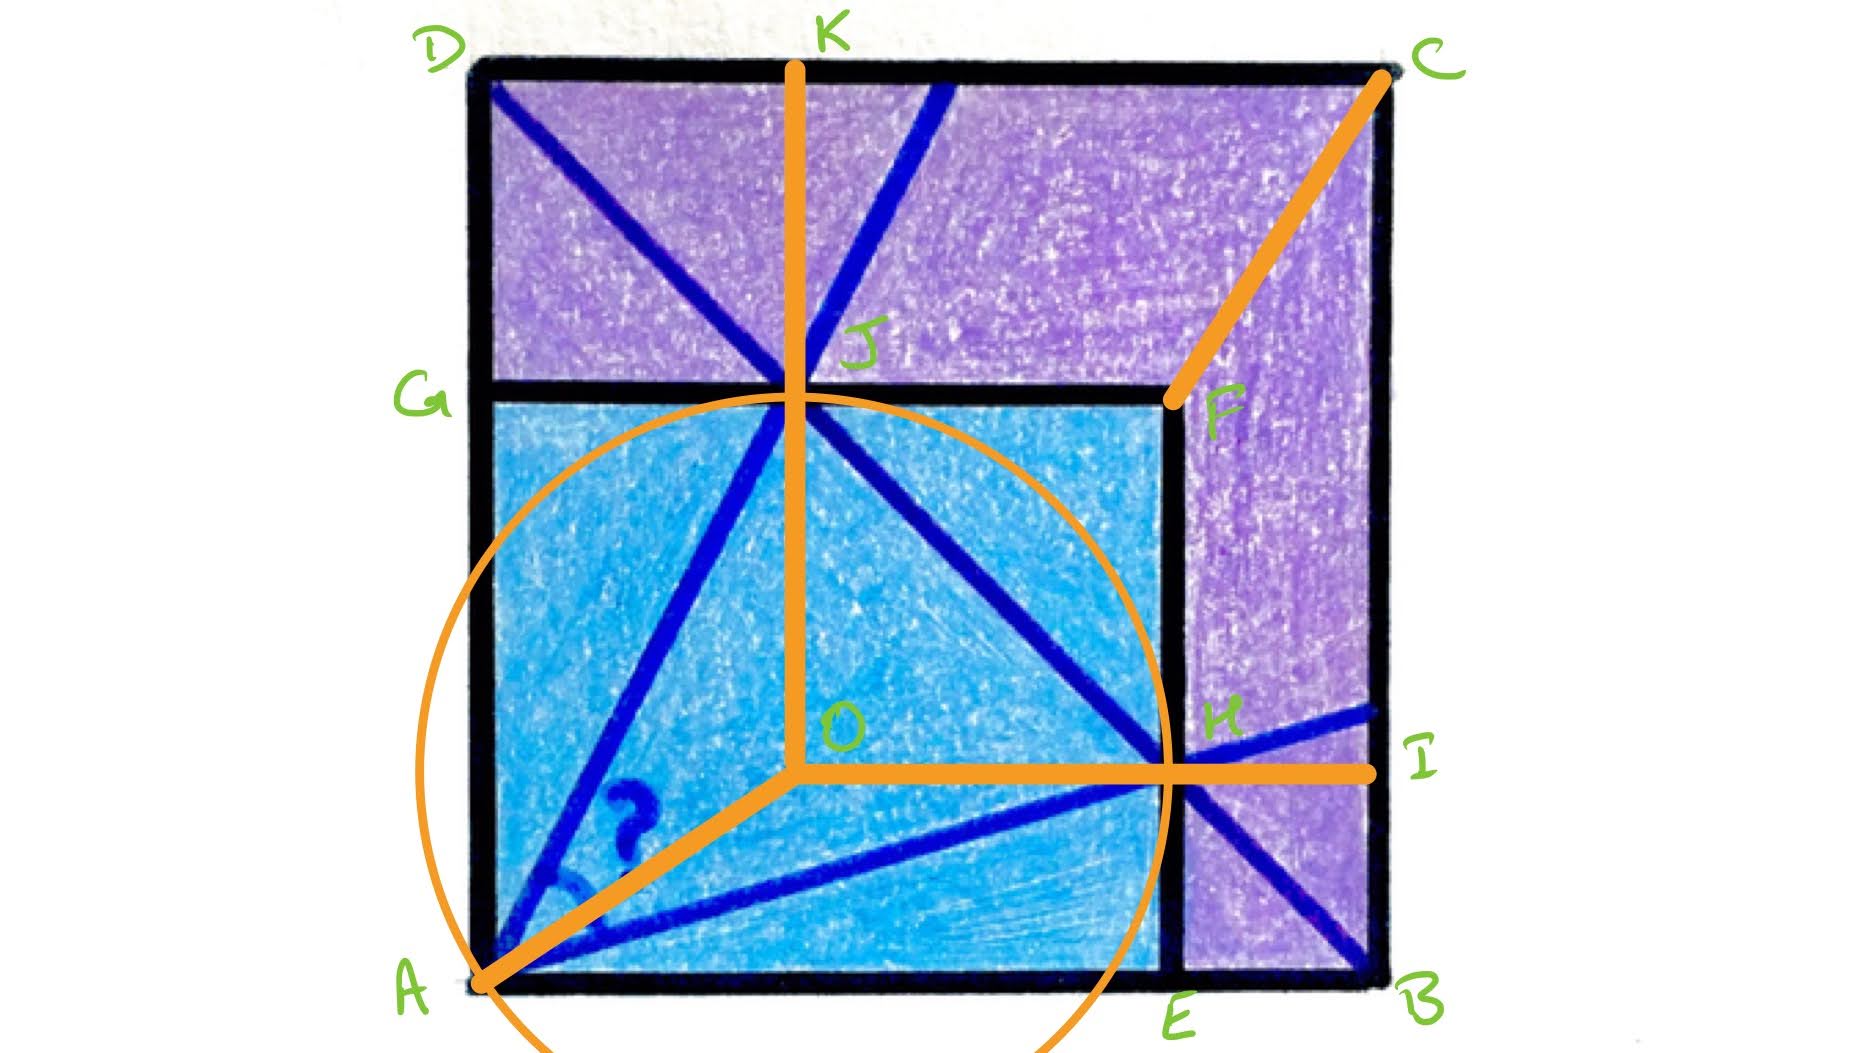 A rectangle in a square labelled